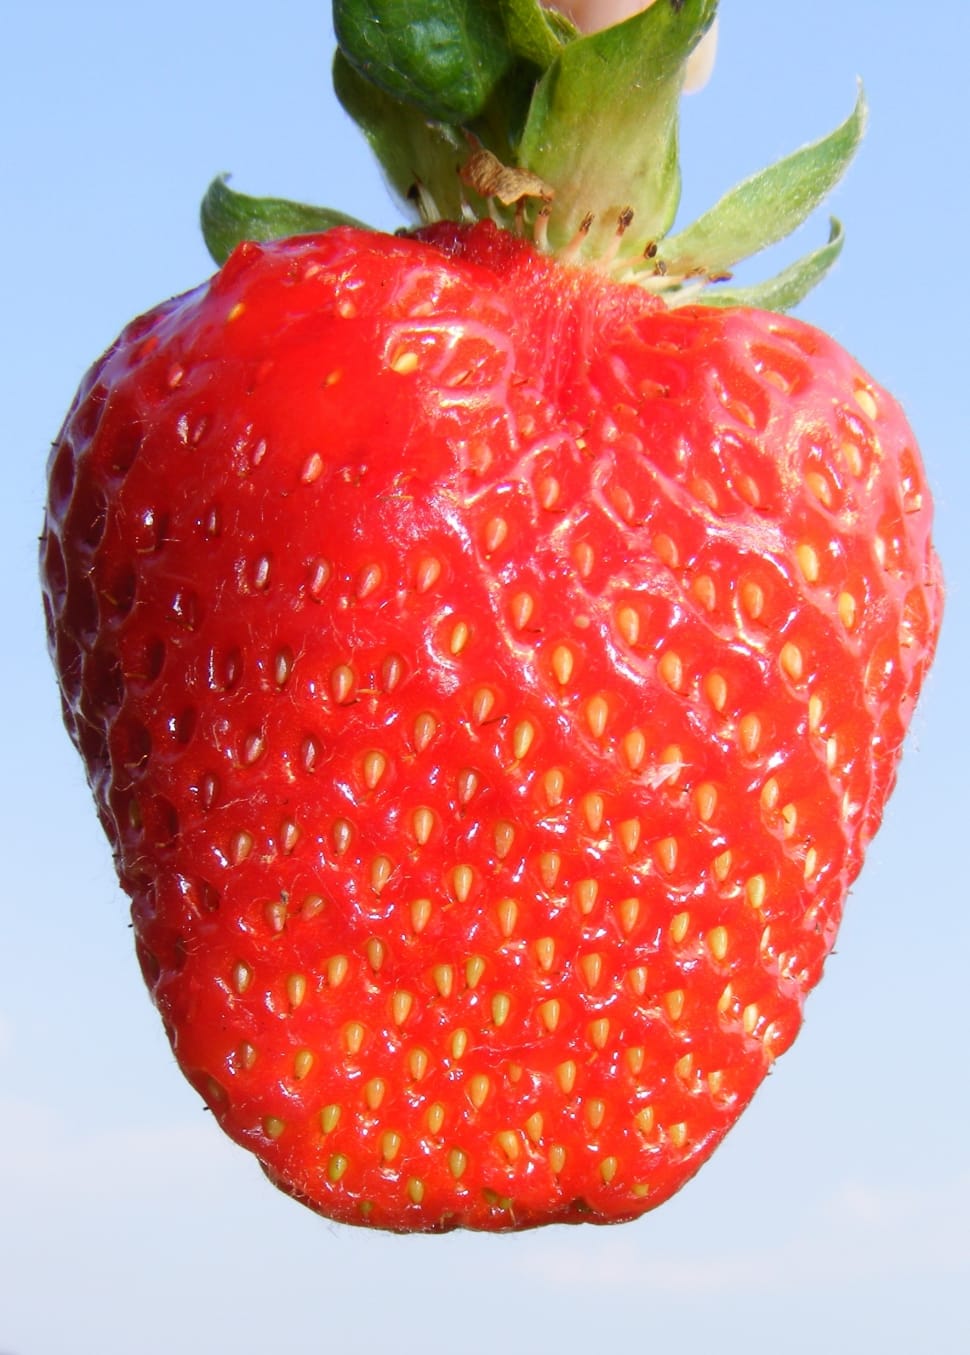 Strawberry, Girl, Sky, Blue, Fresh, Hand, red, fruit preview